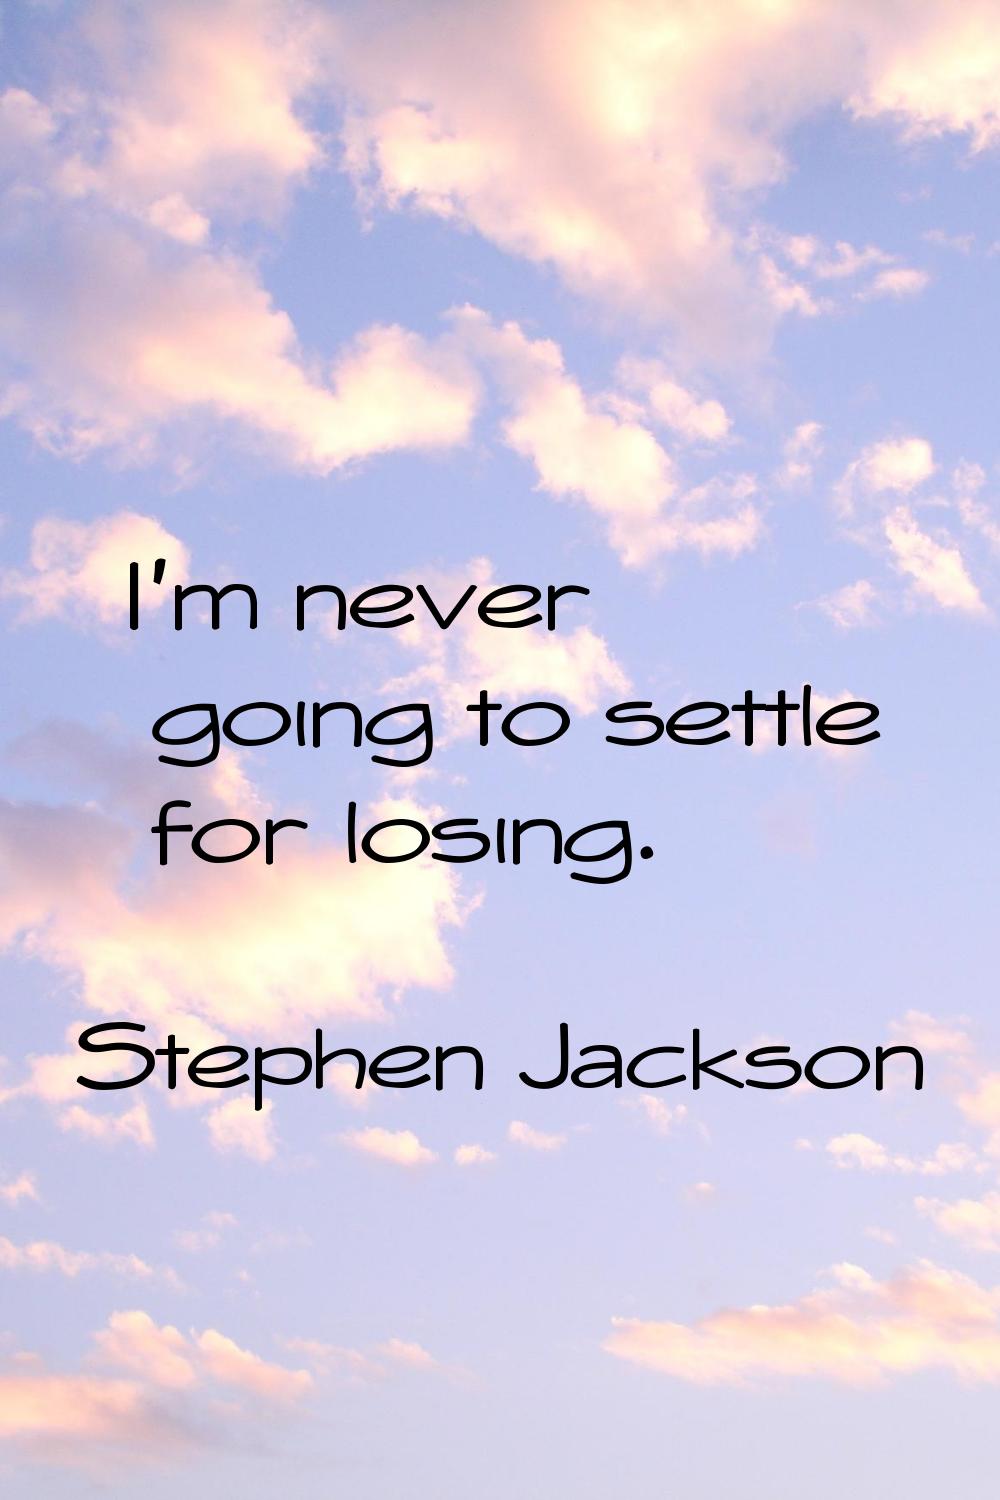 I'm never going to settle for losing.